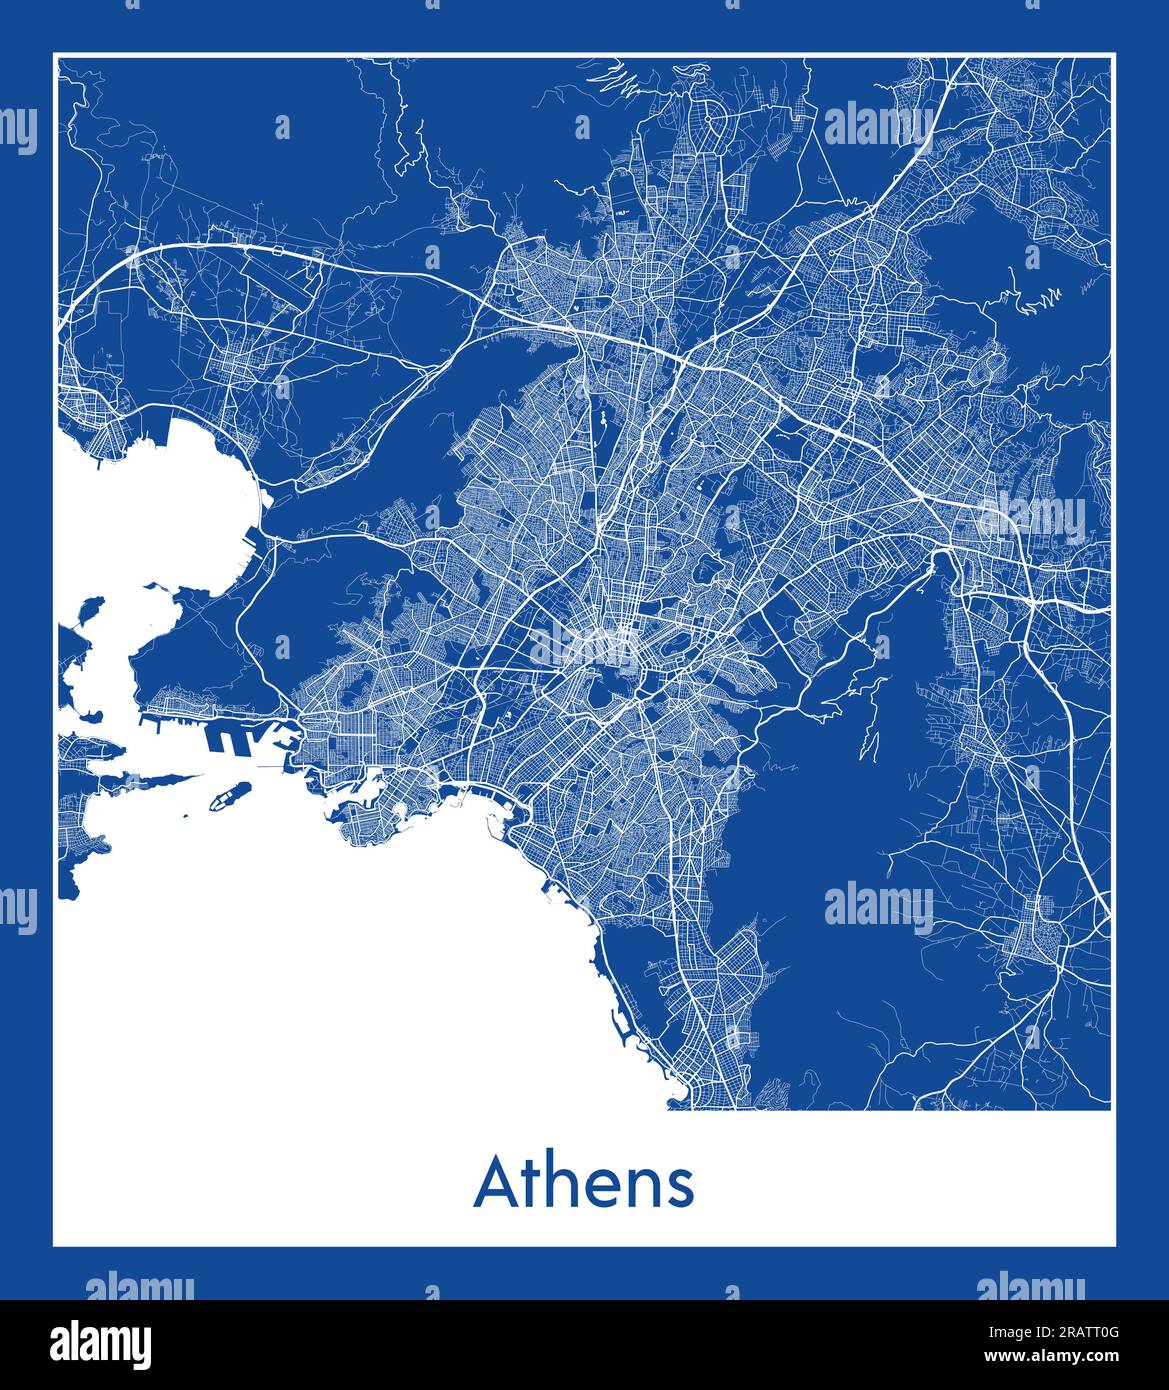 Athens Greece Europe City map blue print vector illustration Stock Vector